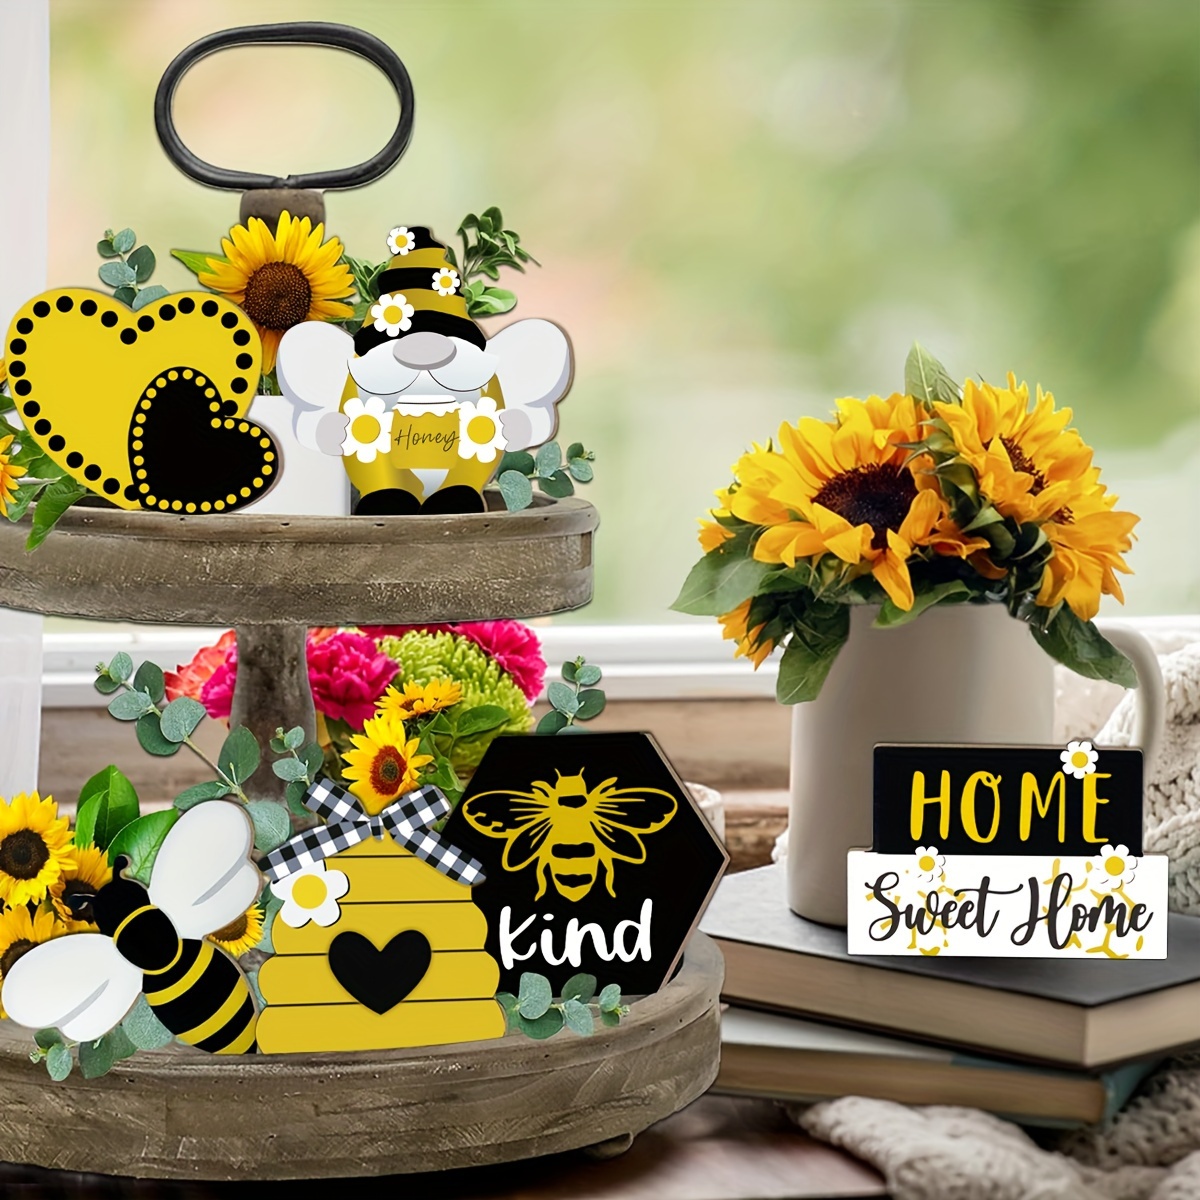  Bee Decor, Wood Bee Crate Decorations, Humble Bee Gnome Plush  with Honey Dipper,Rustic Farmhouse Bee Tiered Tray Decor, Mini Wood Crate  with Artificial Sunflowers Decor, Summer Decorations for Home : Home